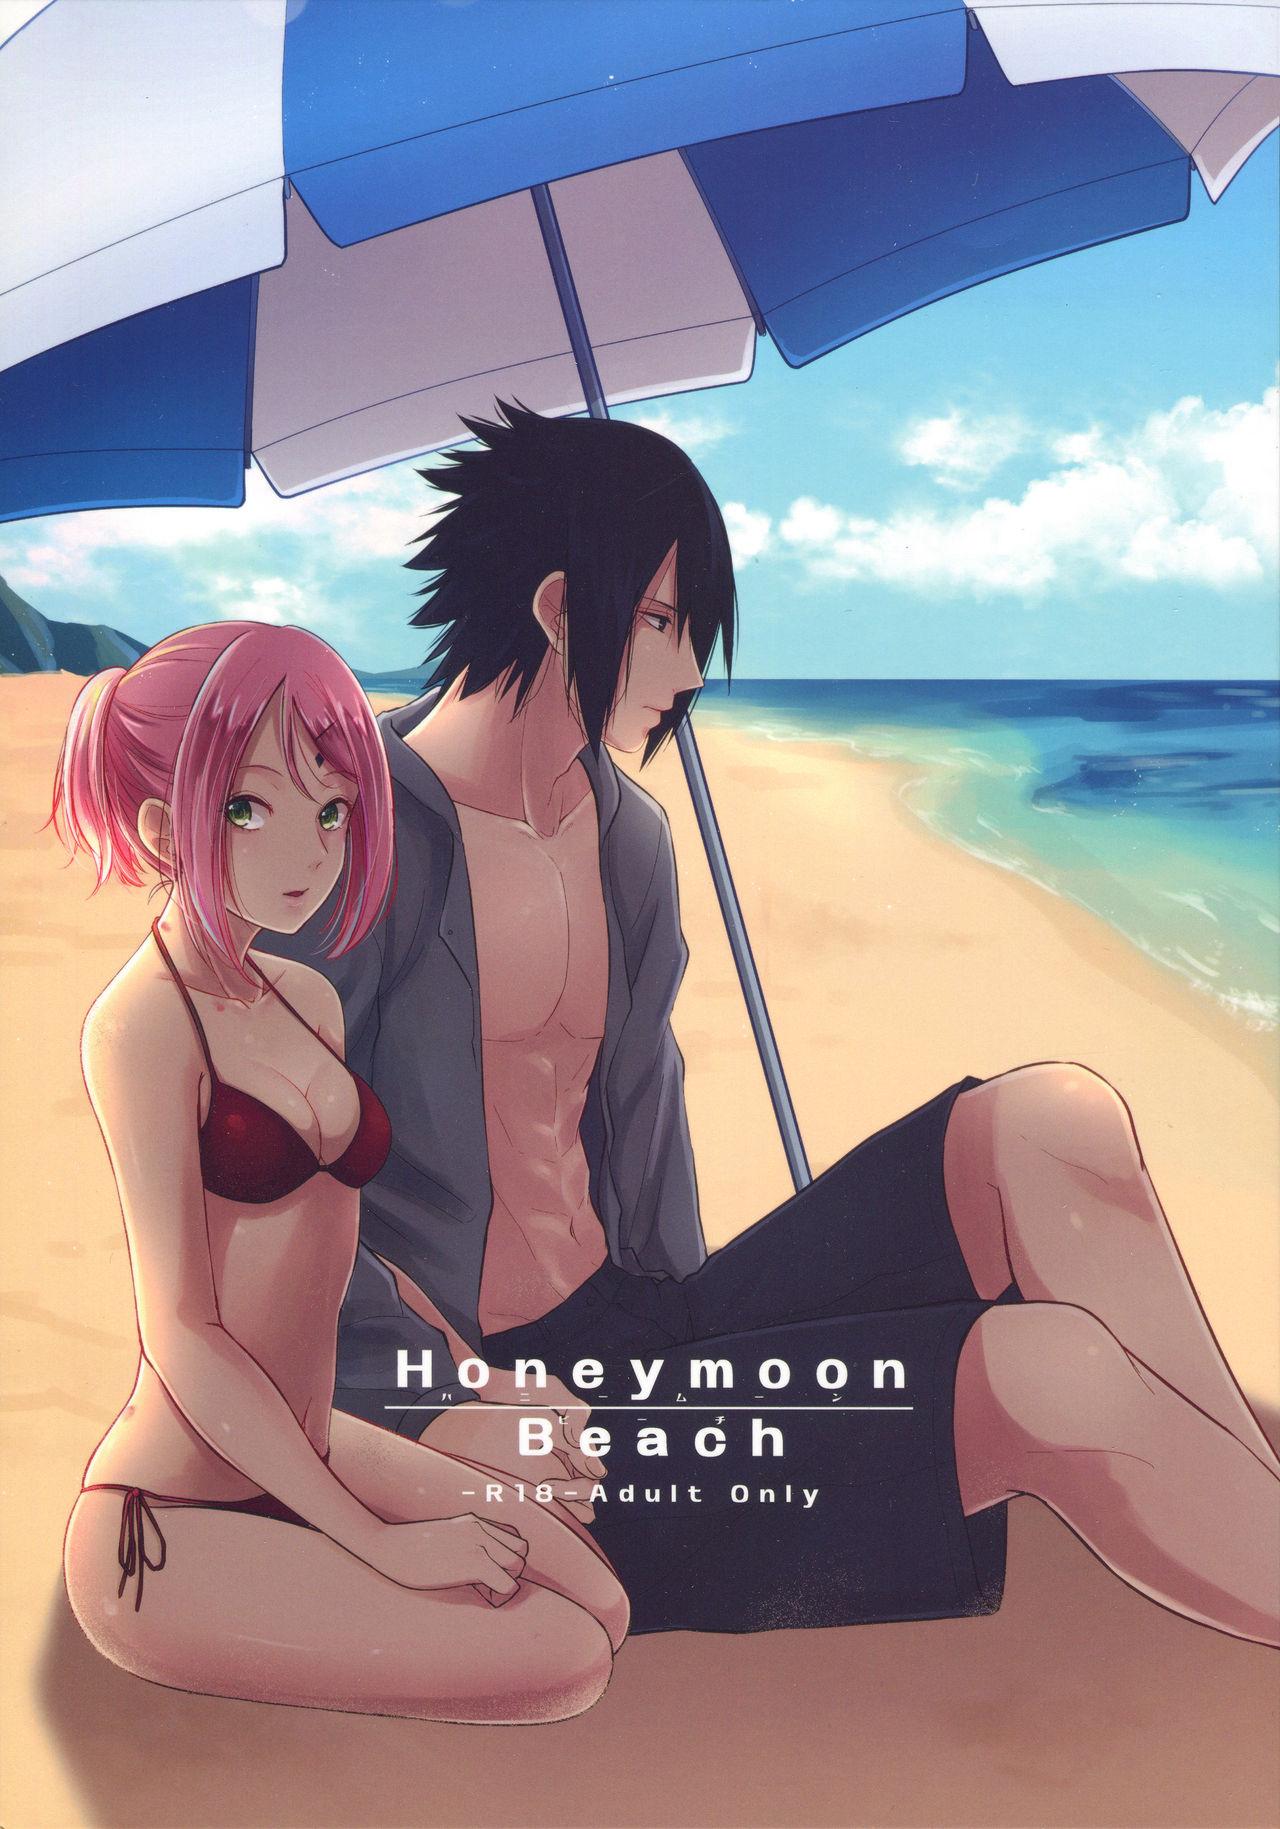 Old And Young Honeymoon Beach - Naruto Moneytalks - Picture 1